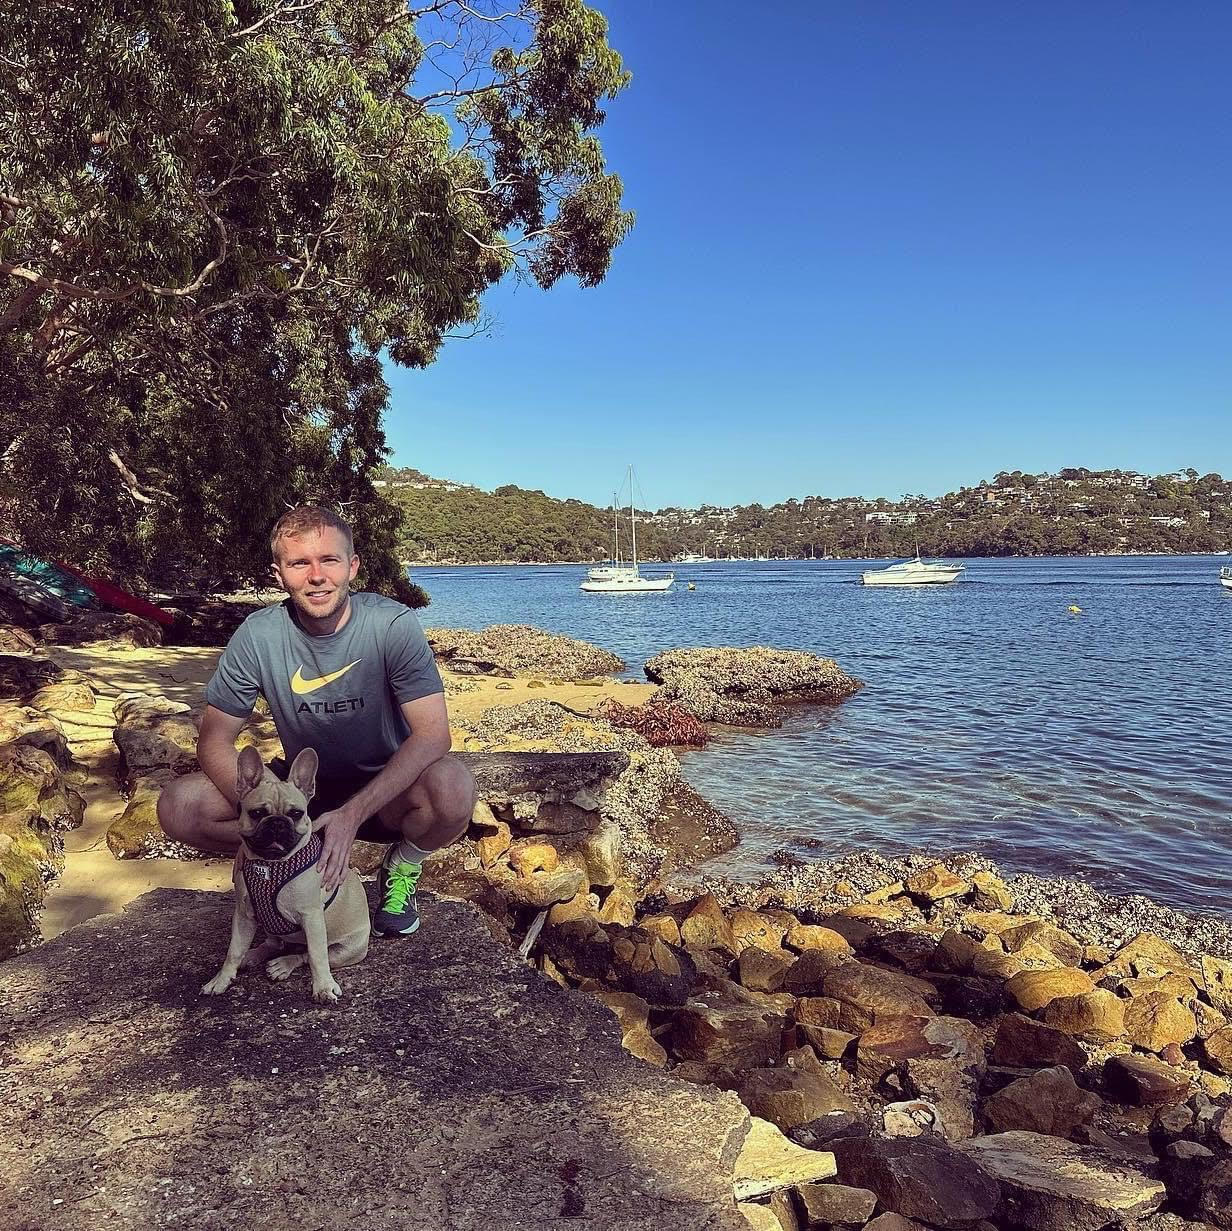 Scott Robertson getting out and about with his dog during the Better Challenge